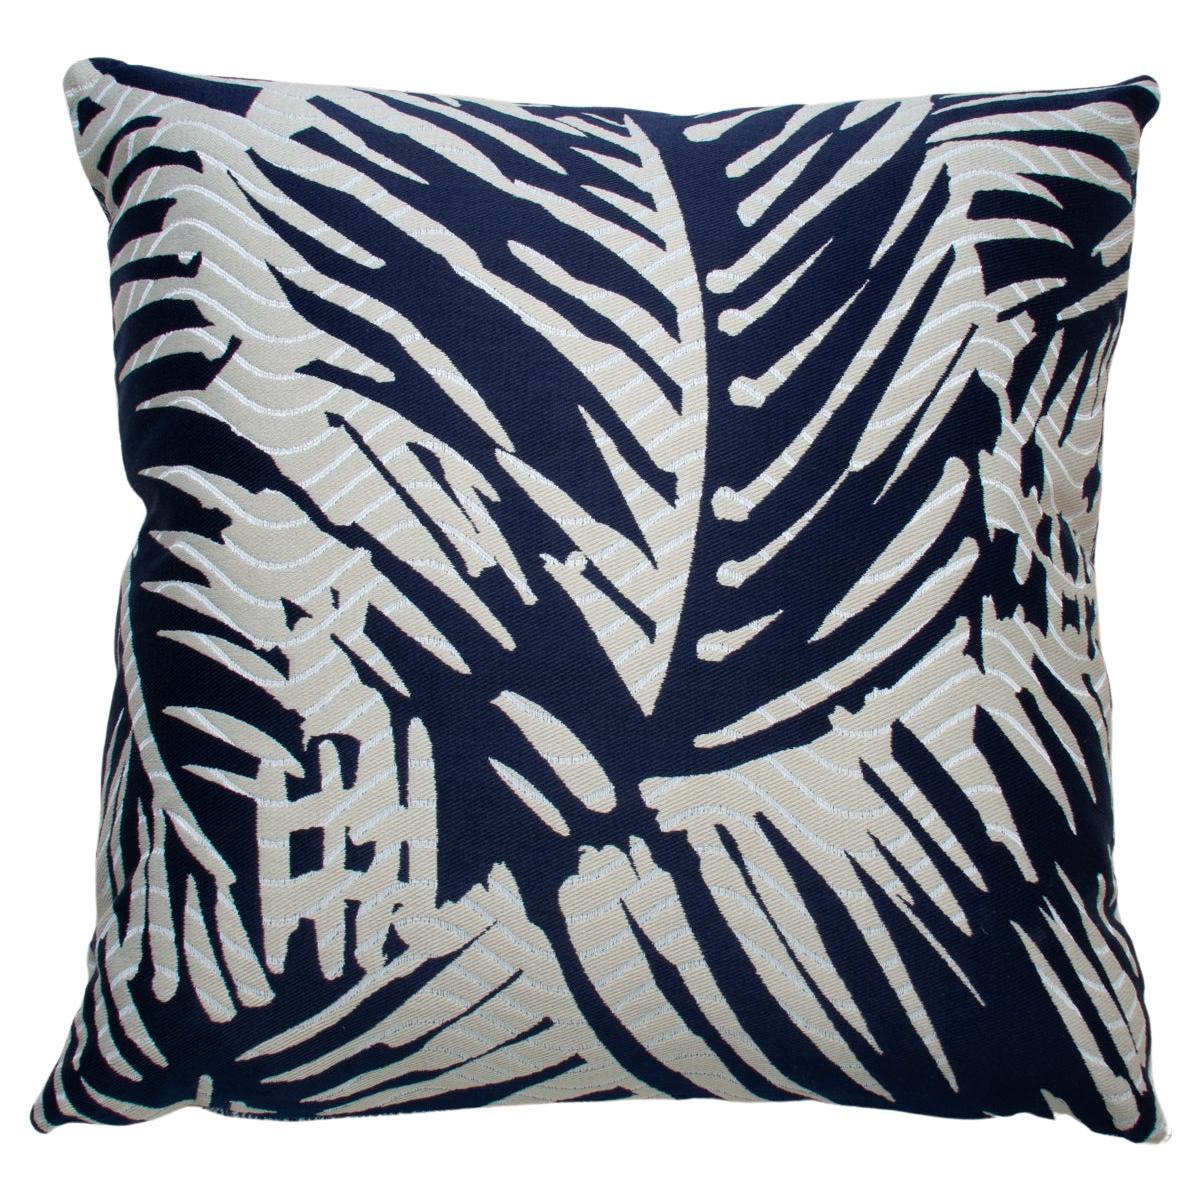 Hermes Pillow Feuillage Vague in Navy, Diamond Backing